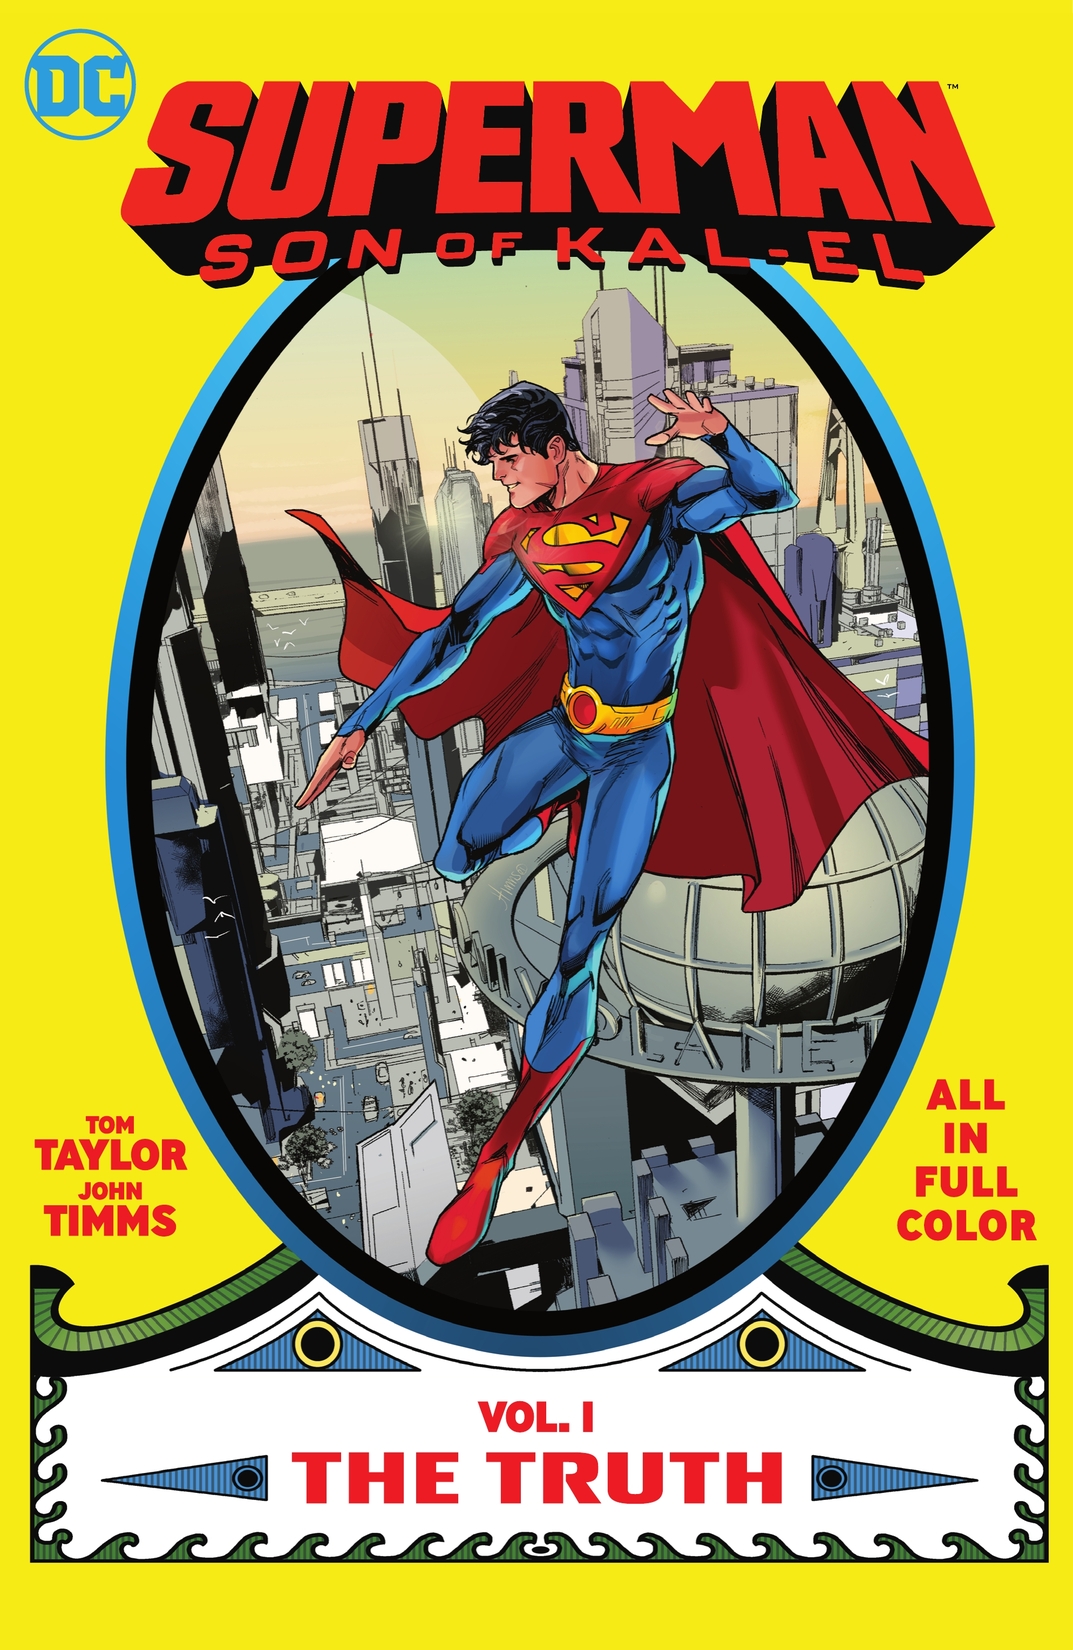 Superman: Son of Kal-El Vol. 1: The Truth preview images